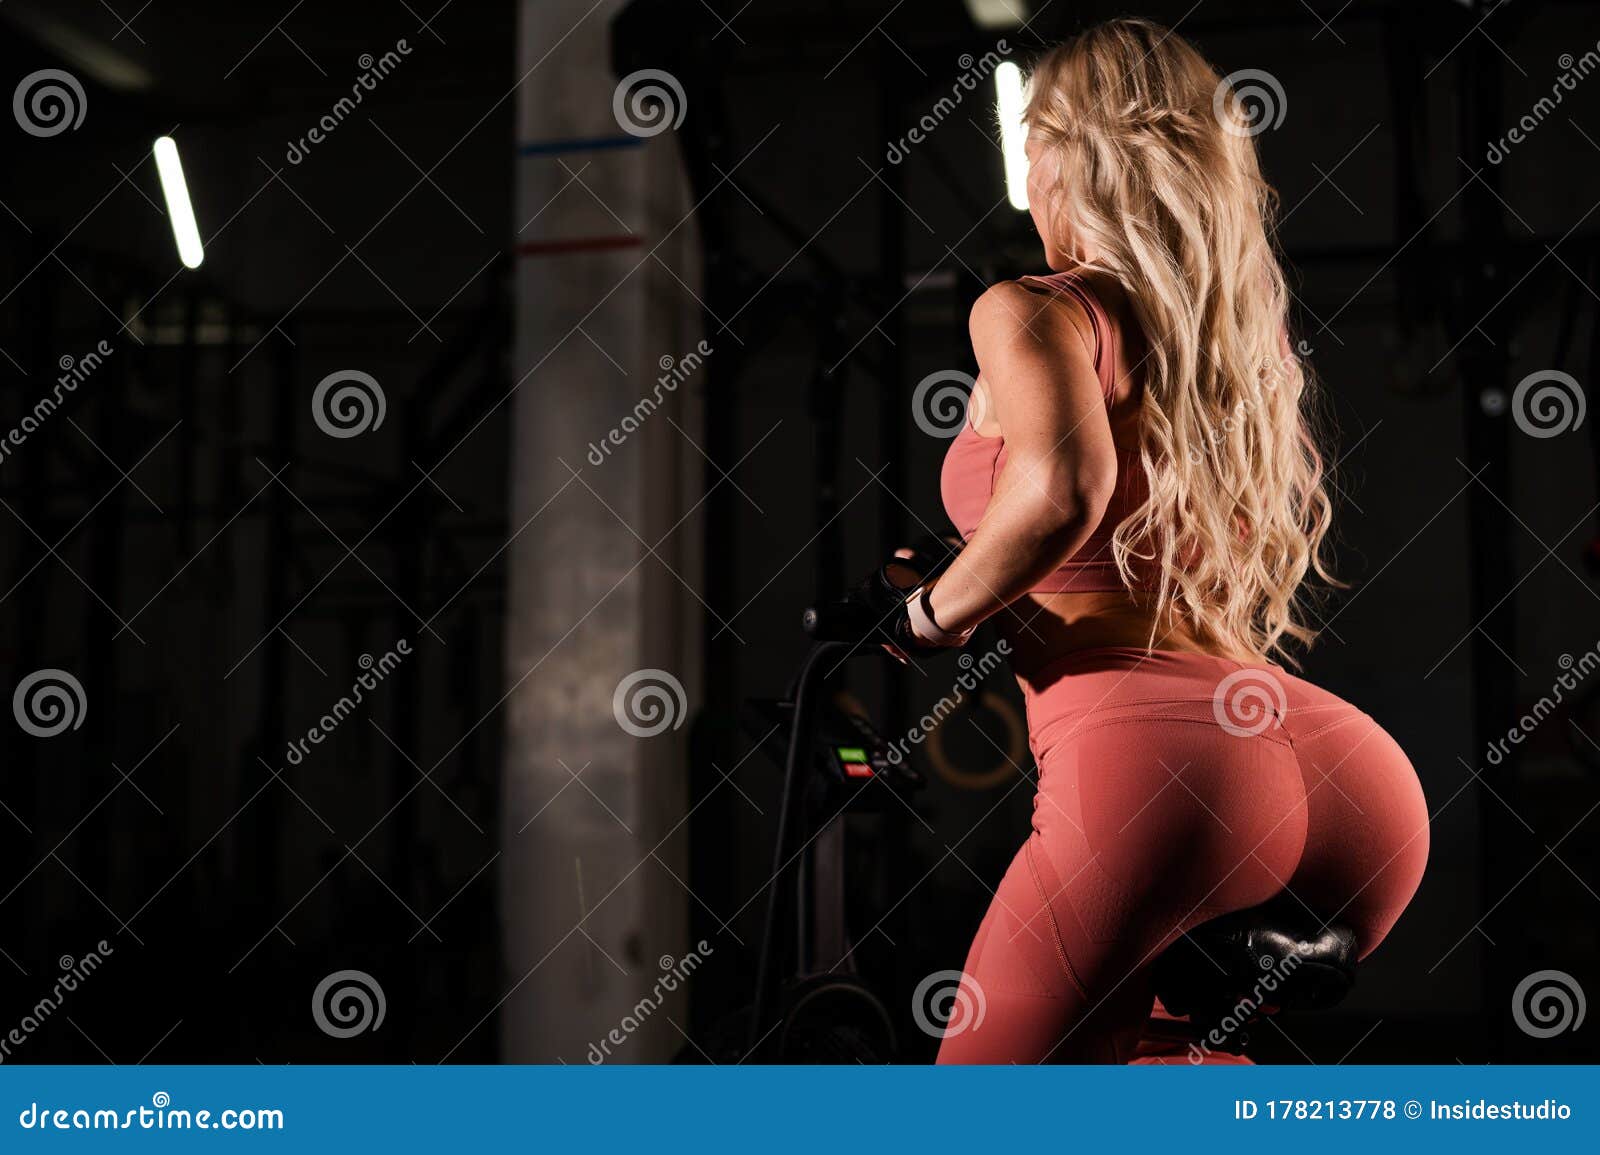 Unrecognizable Blonde With Elastic Buttocks Is Training In An Air Bike